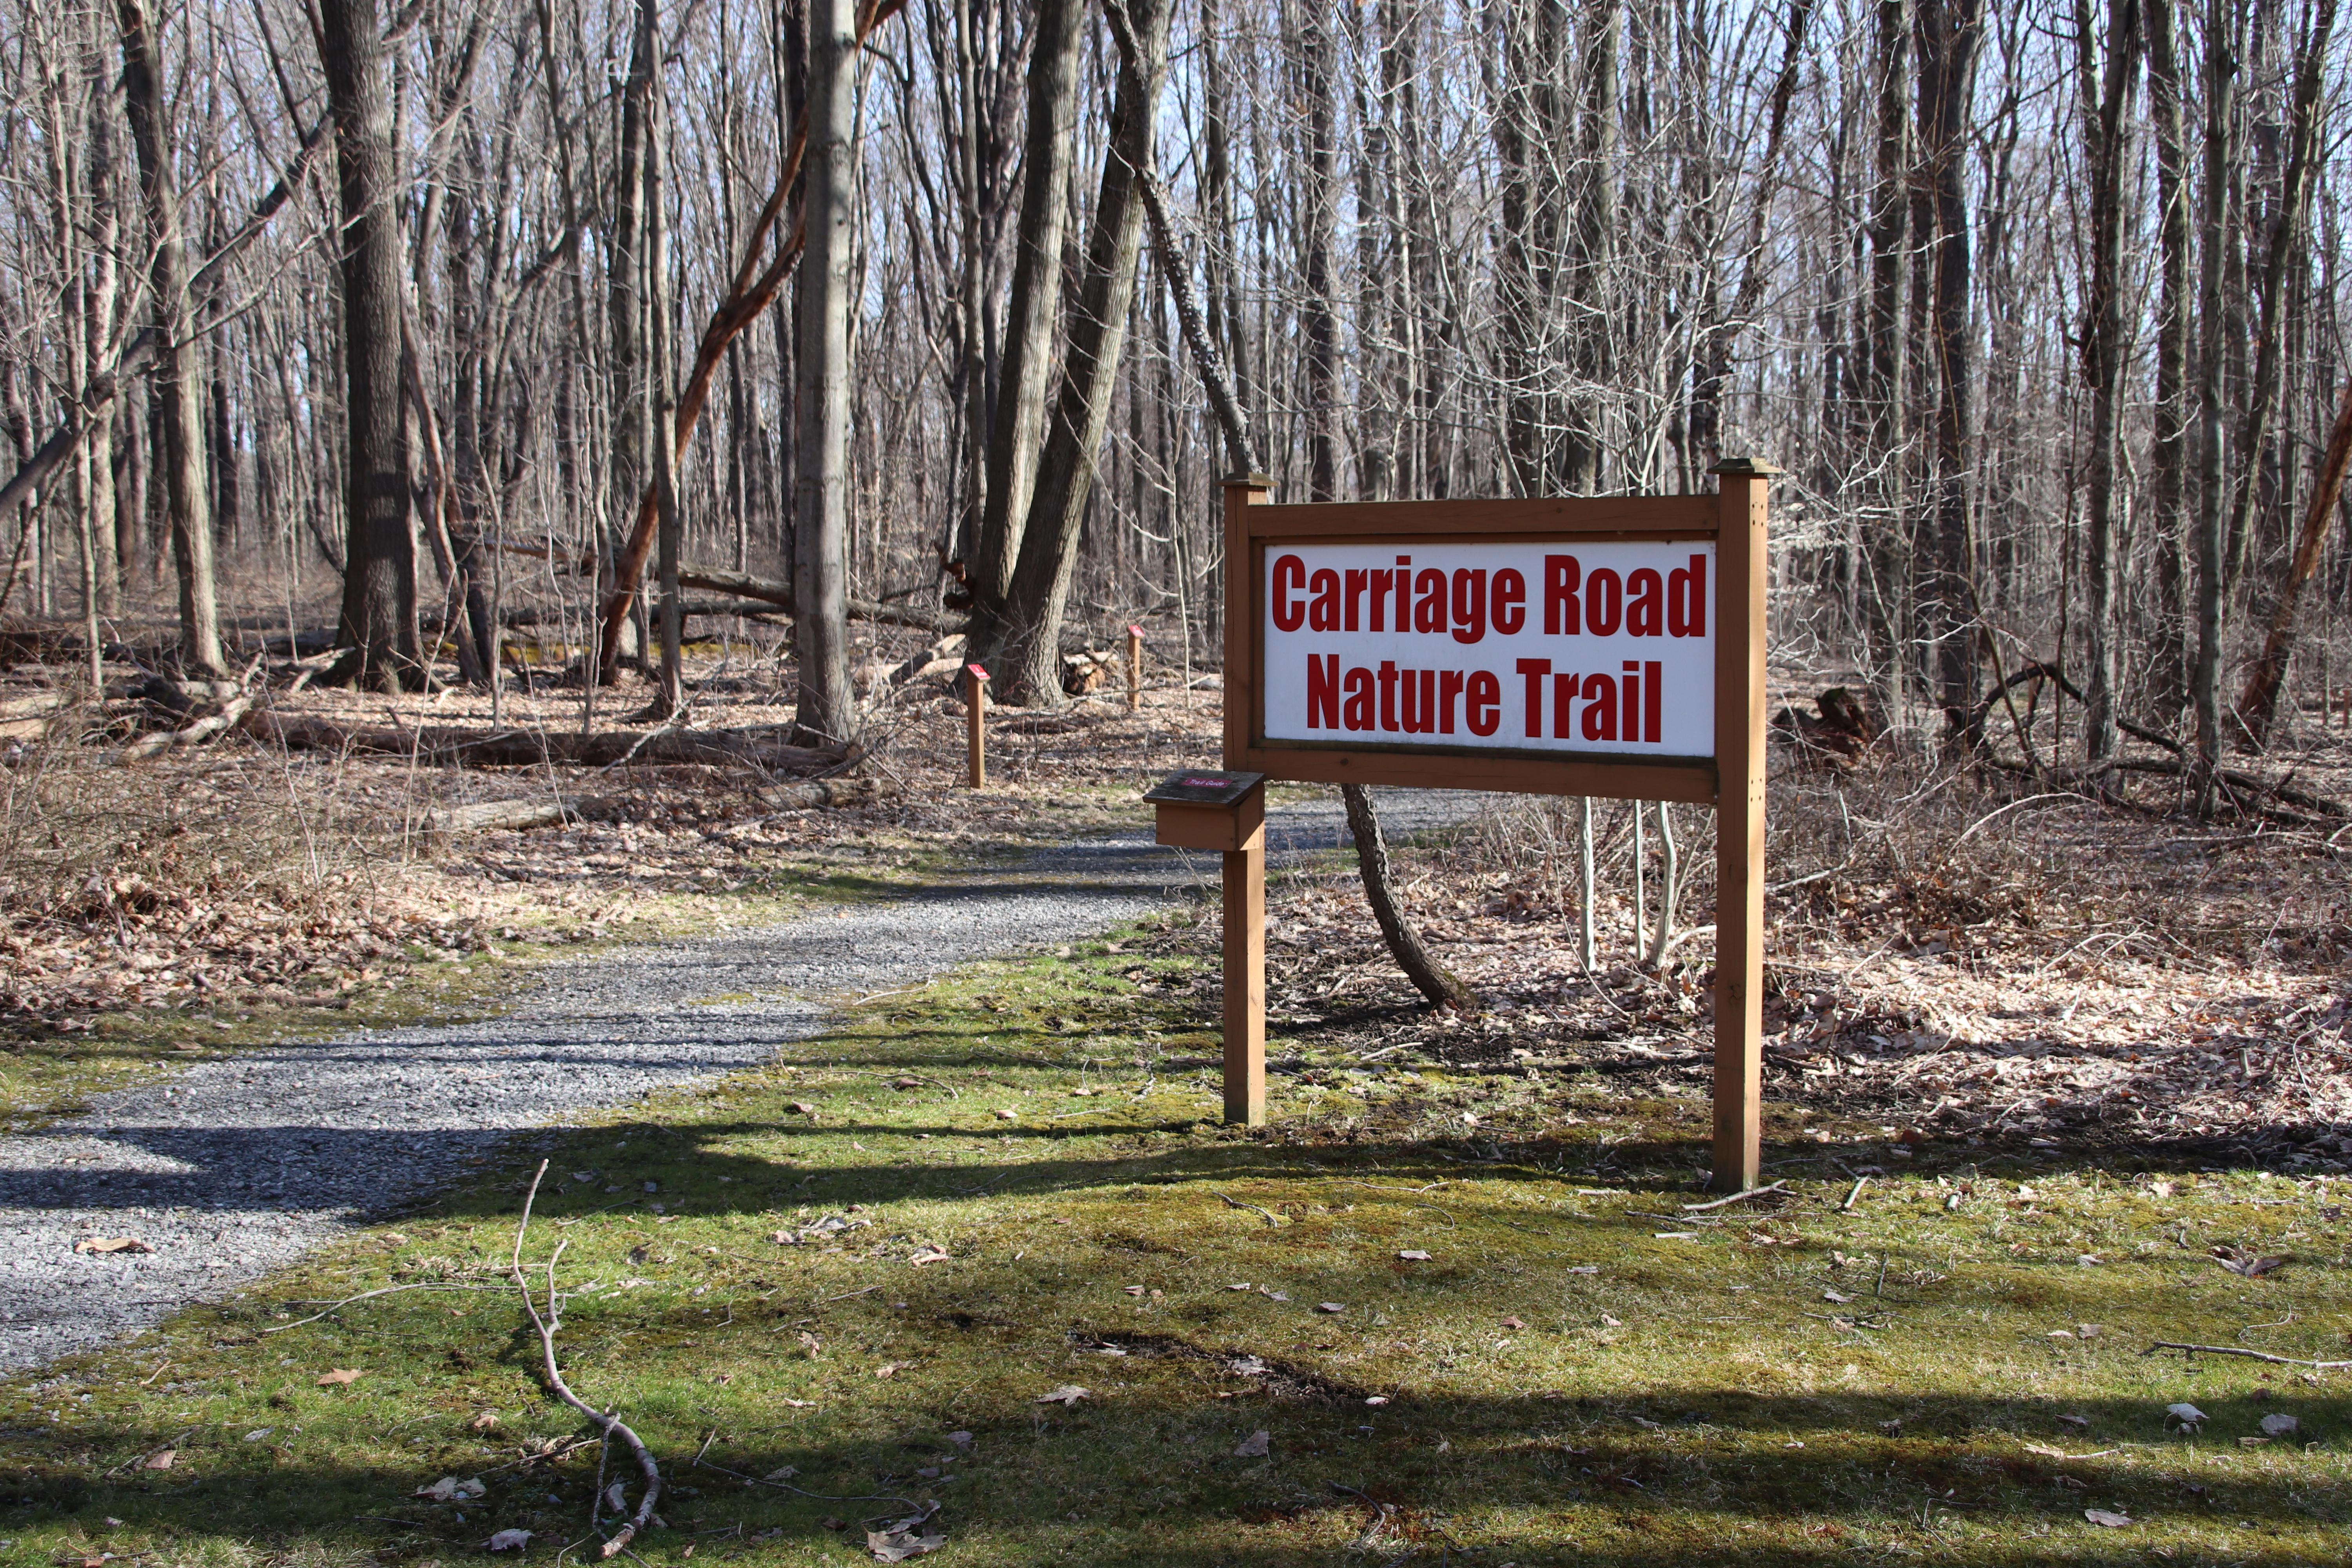 The Carriage Road Nature Trail can be accessed from the picnic area or near the South Abutment.